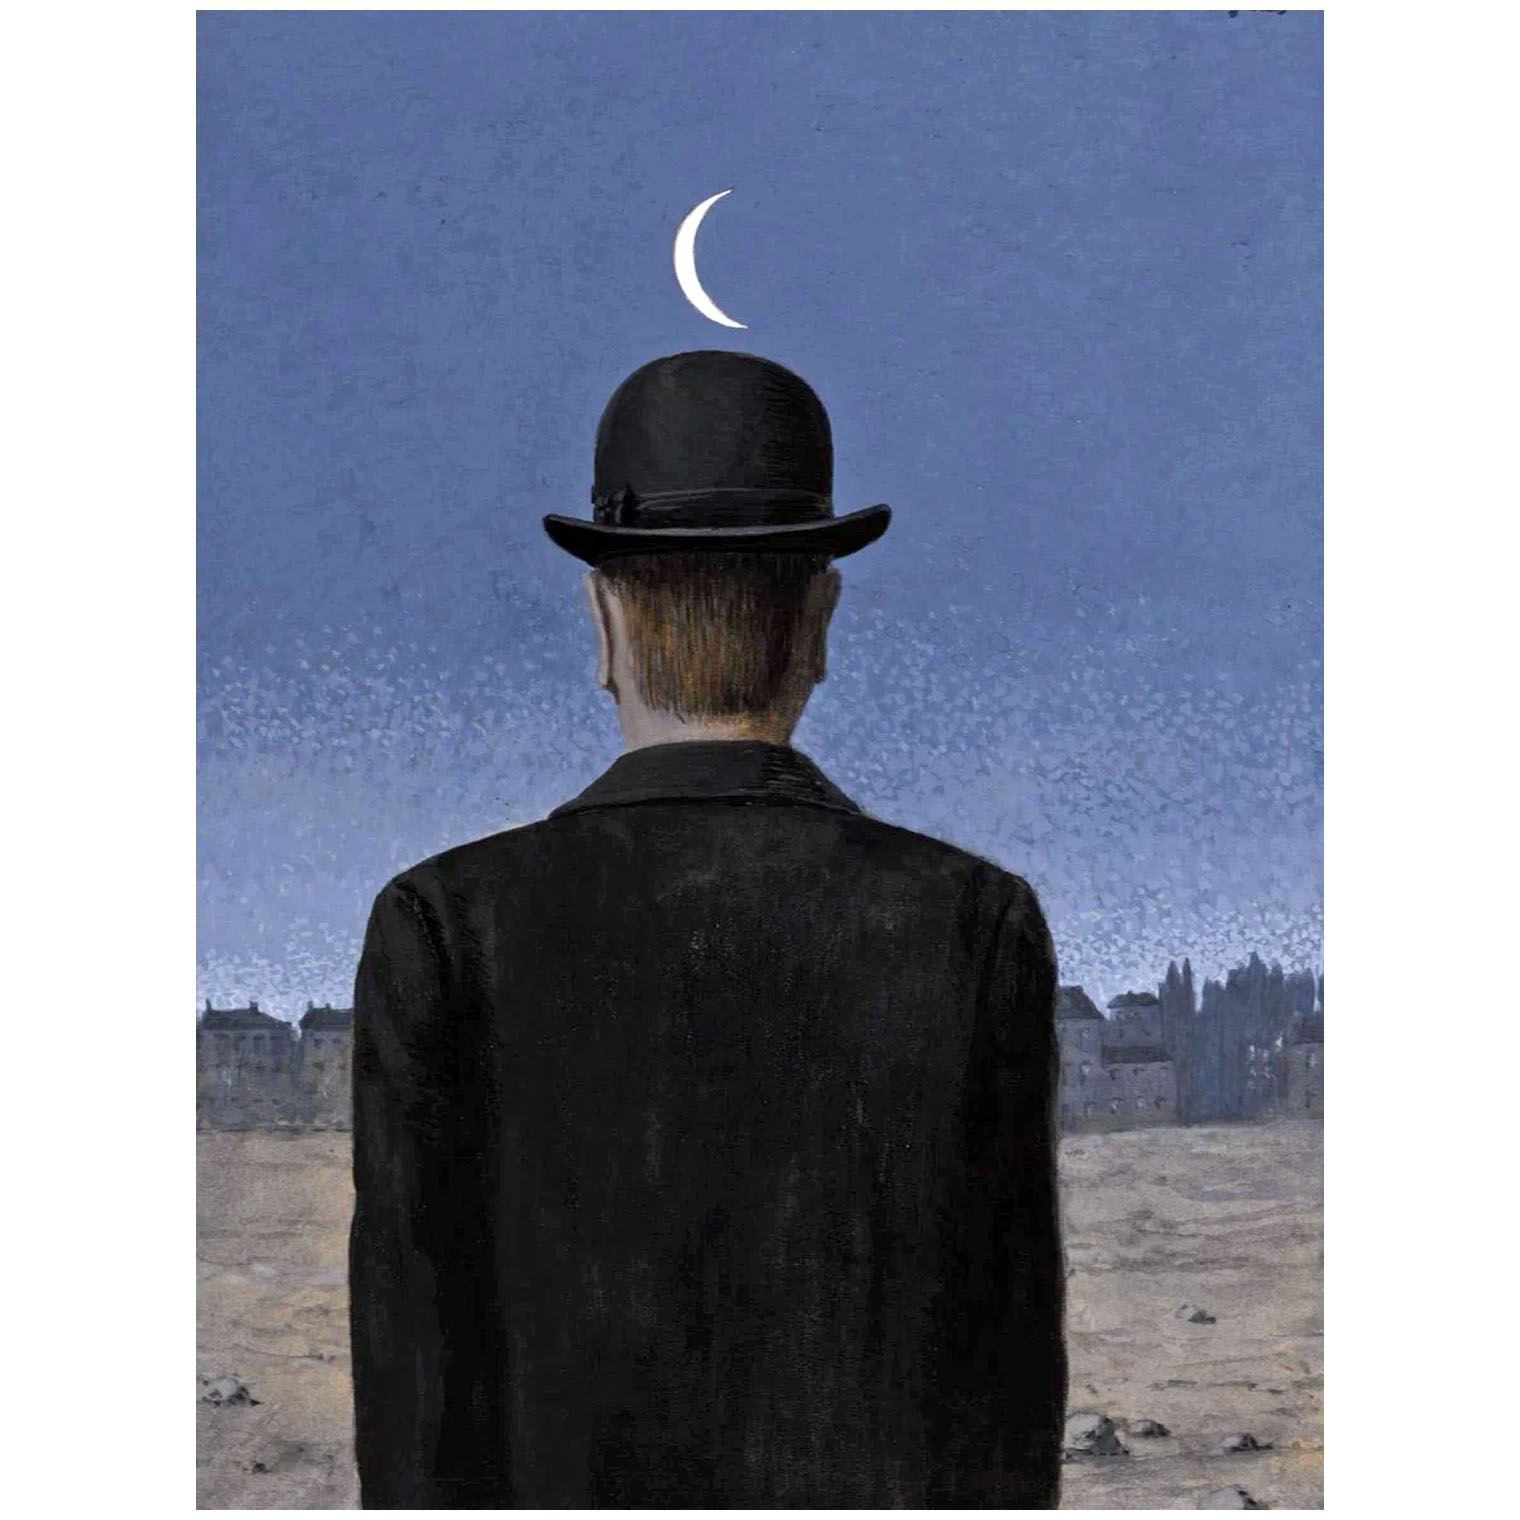 Rene Magritte. Le Maître d'ecole. 1954. Musee Magritte Brussels